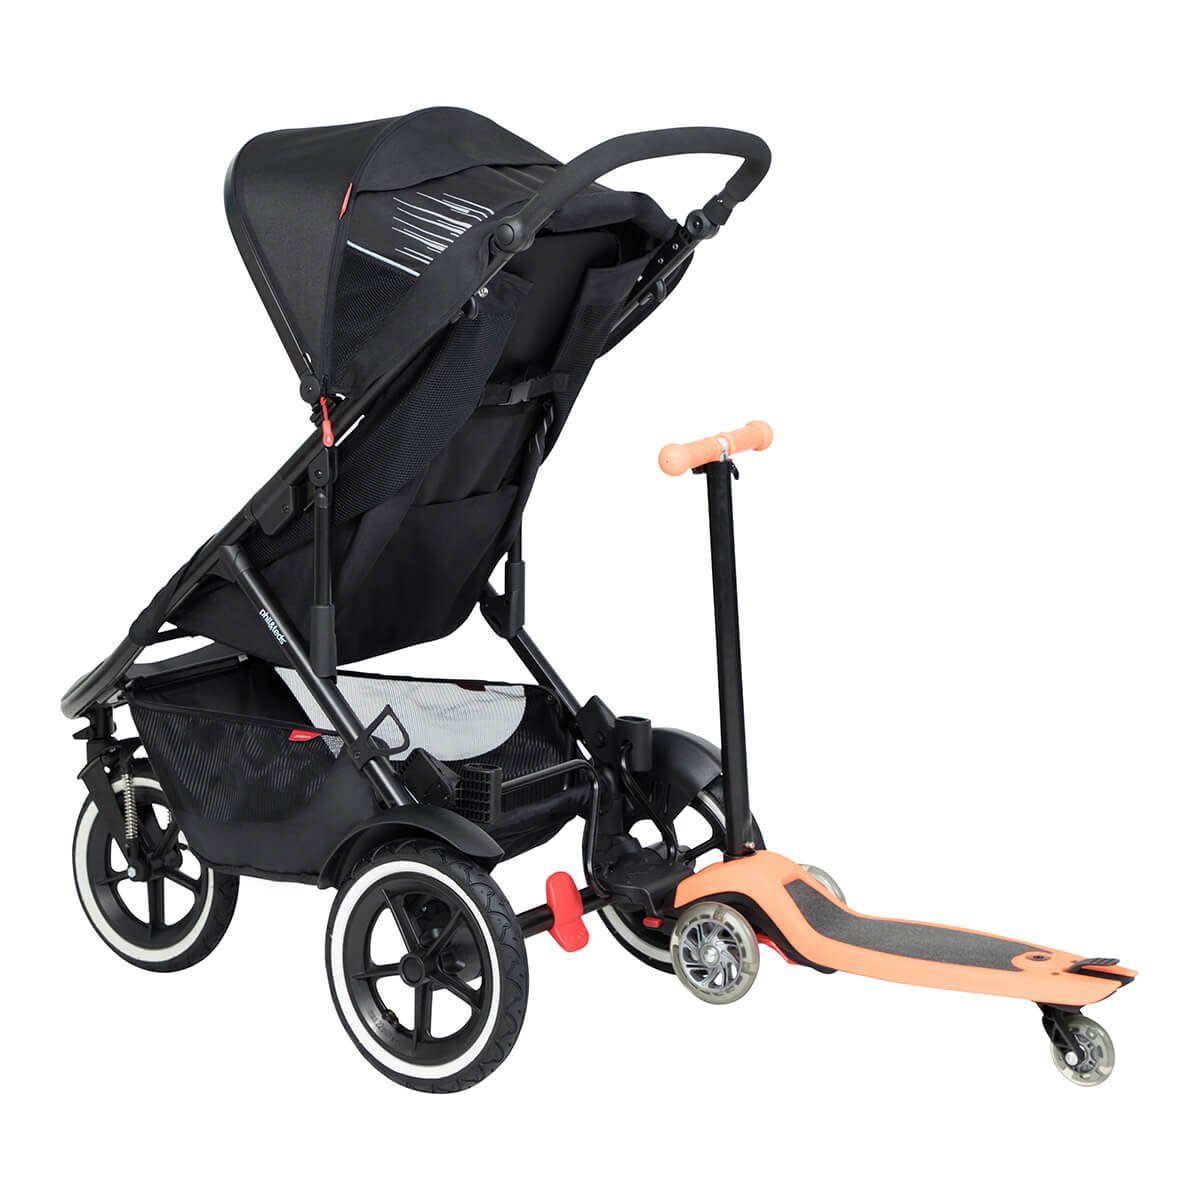 https://cdn.accentuate.io/4546157707369/19119322824809/philteds-sport-buggy-with-freerider-stroller-board-in-rear-v1625778257793.jpg?1200x1200